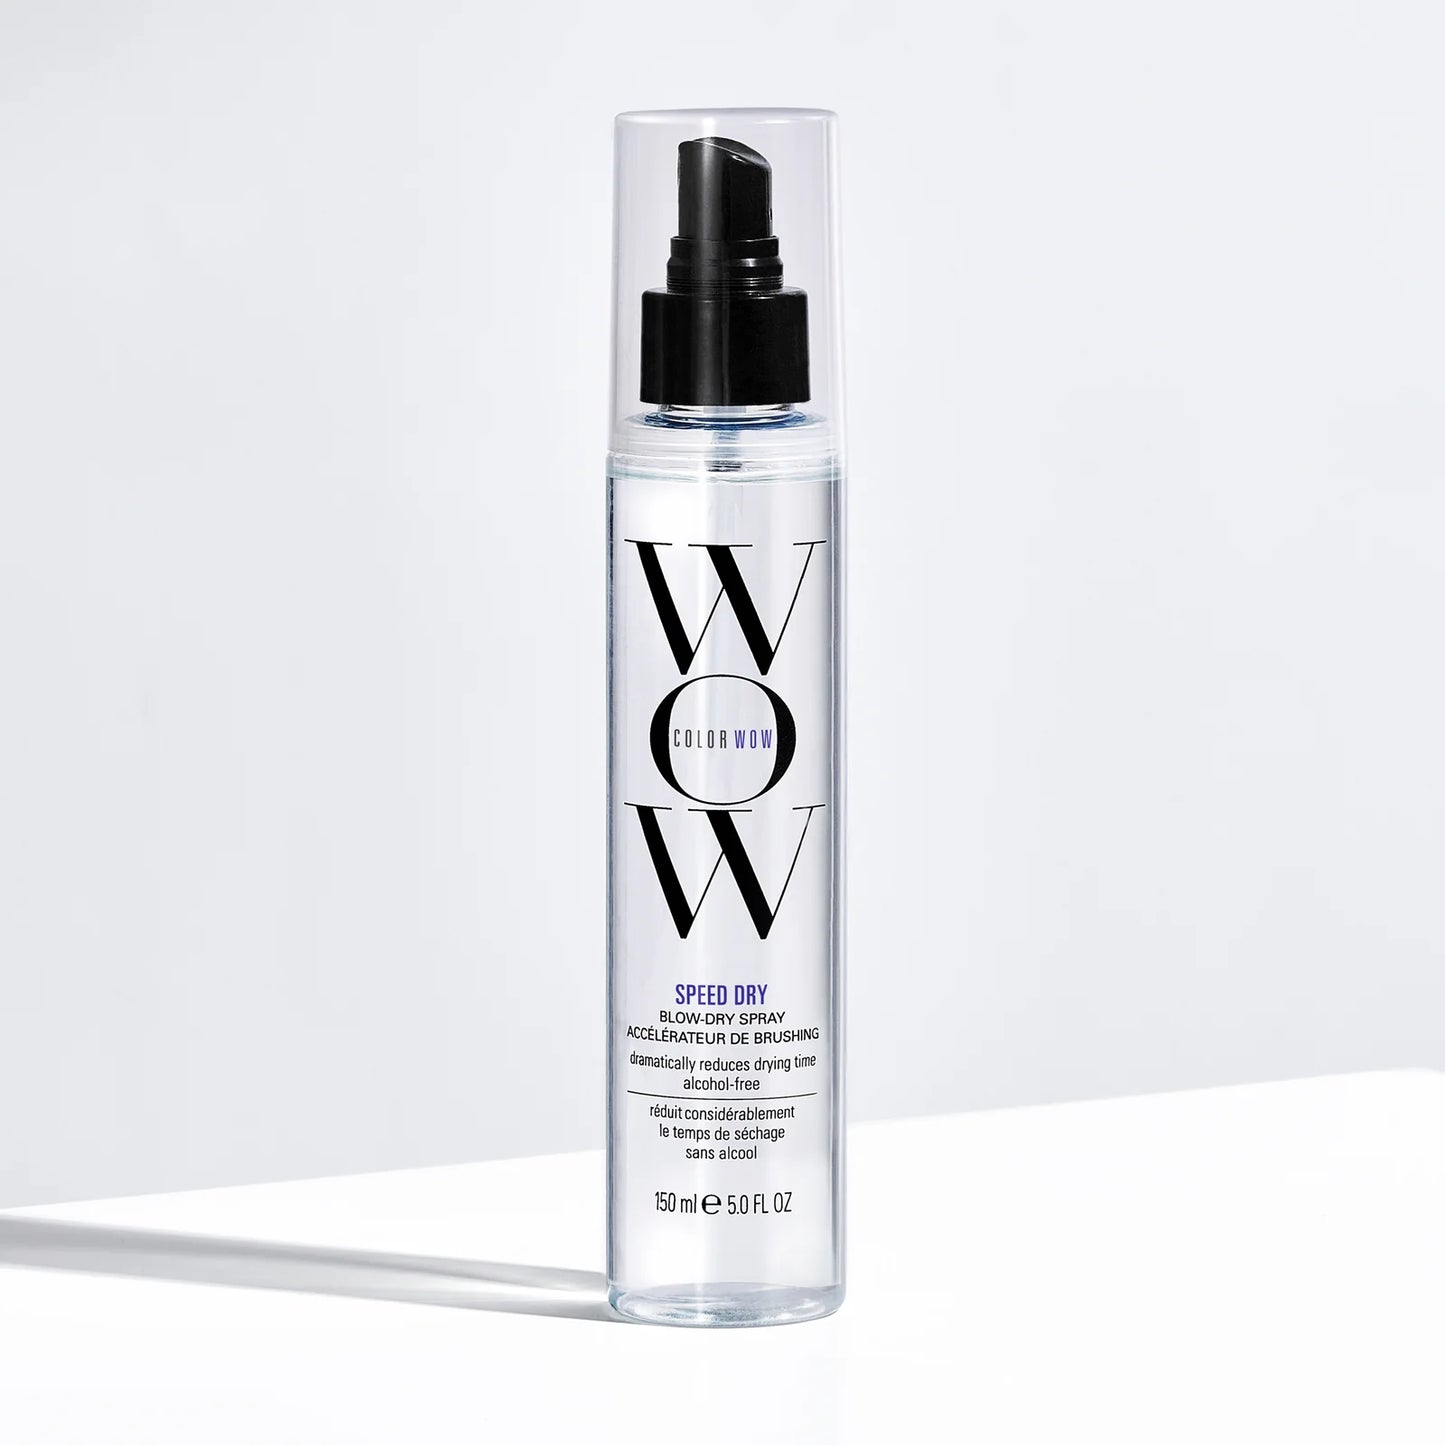 COLOR WOW SPEED DRY BLOW DRY SPRAY 150ML